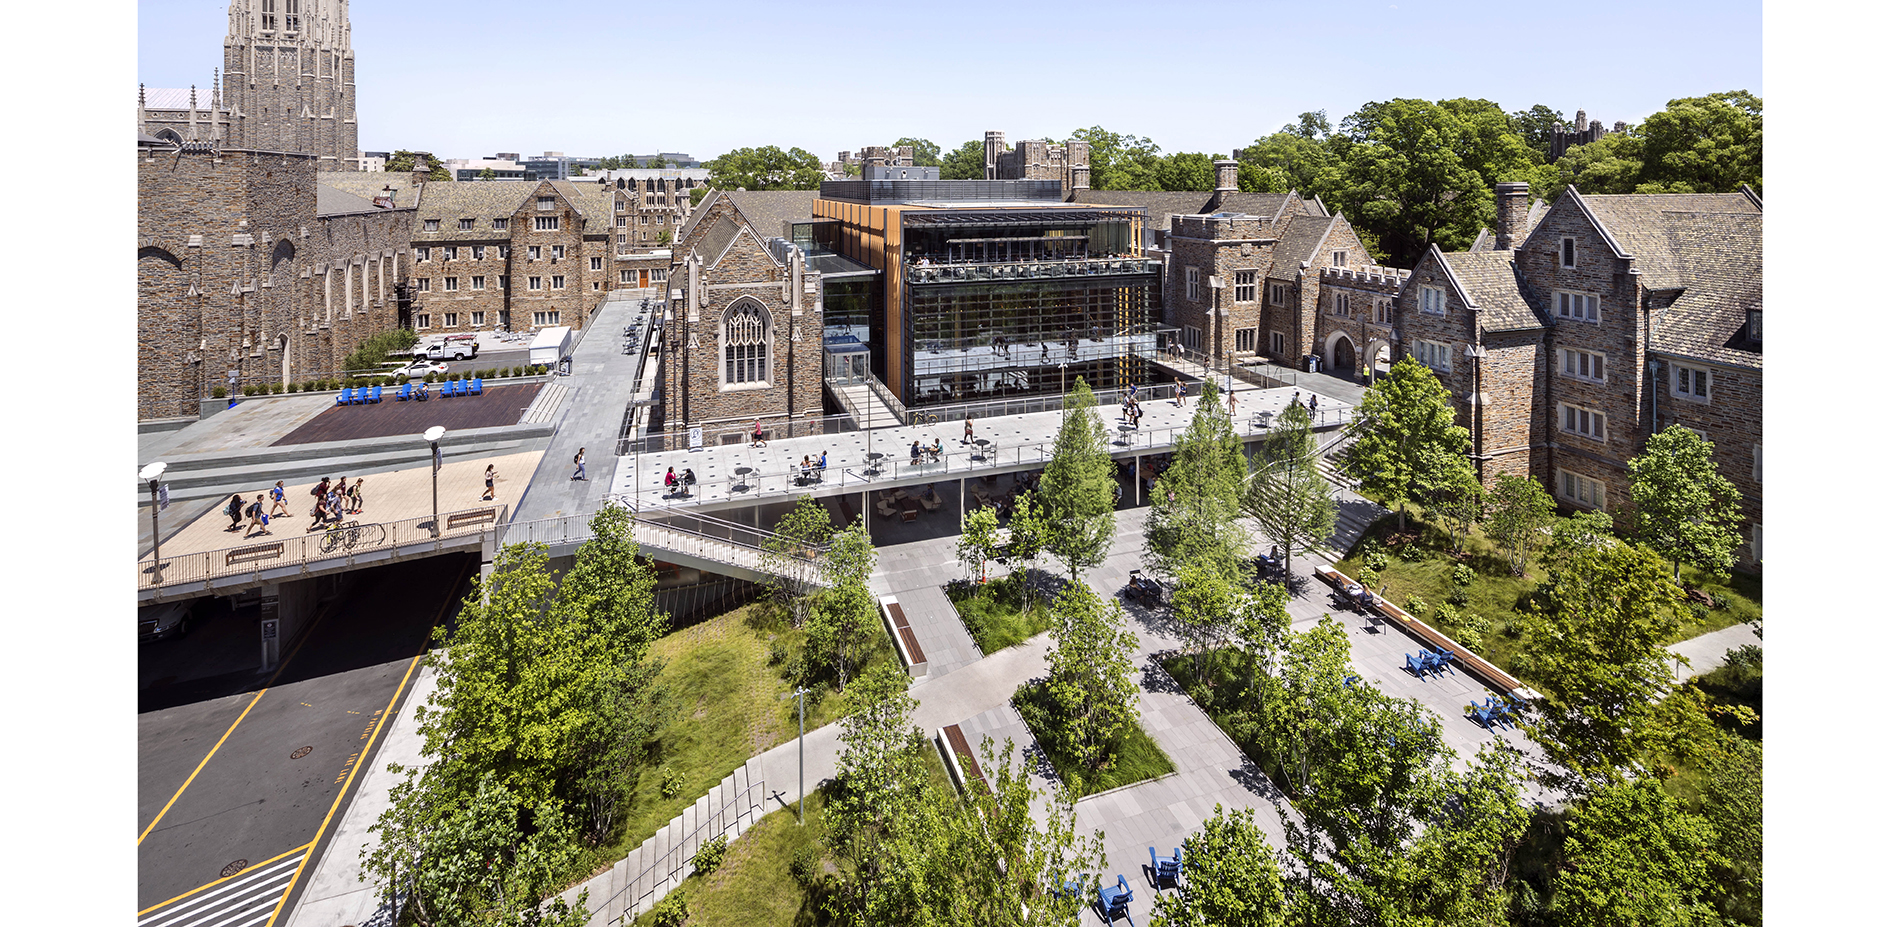 Today, terraces connect buildings and step down from the quad to the surrounding woodland. An organized, five-bay loading dock is contained beneath th…